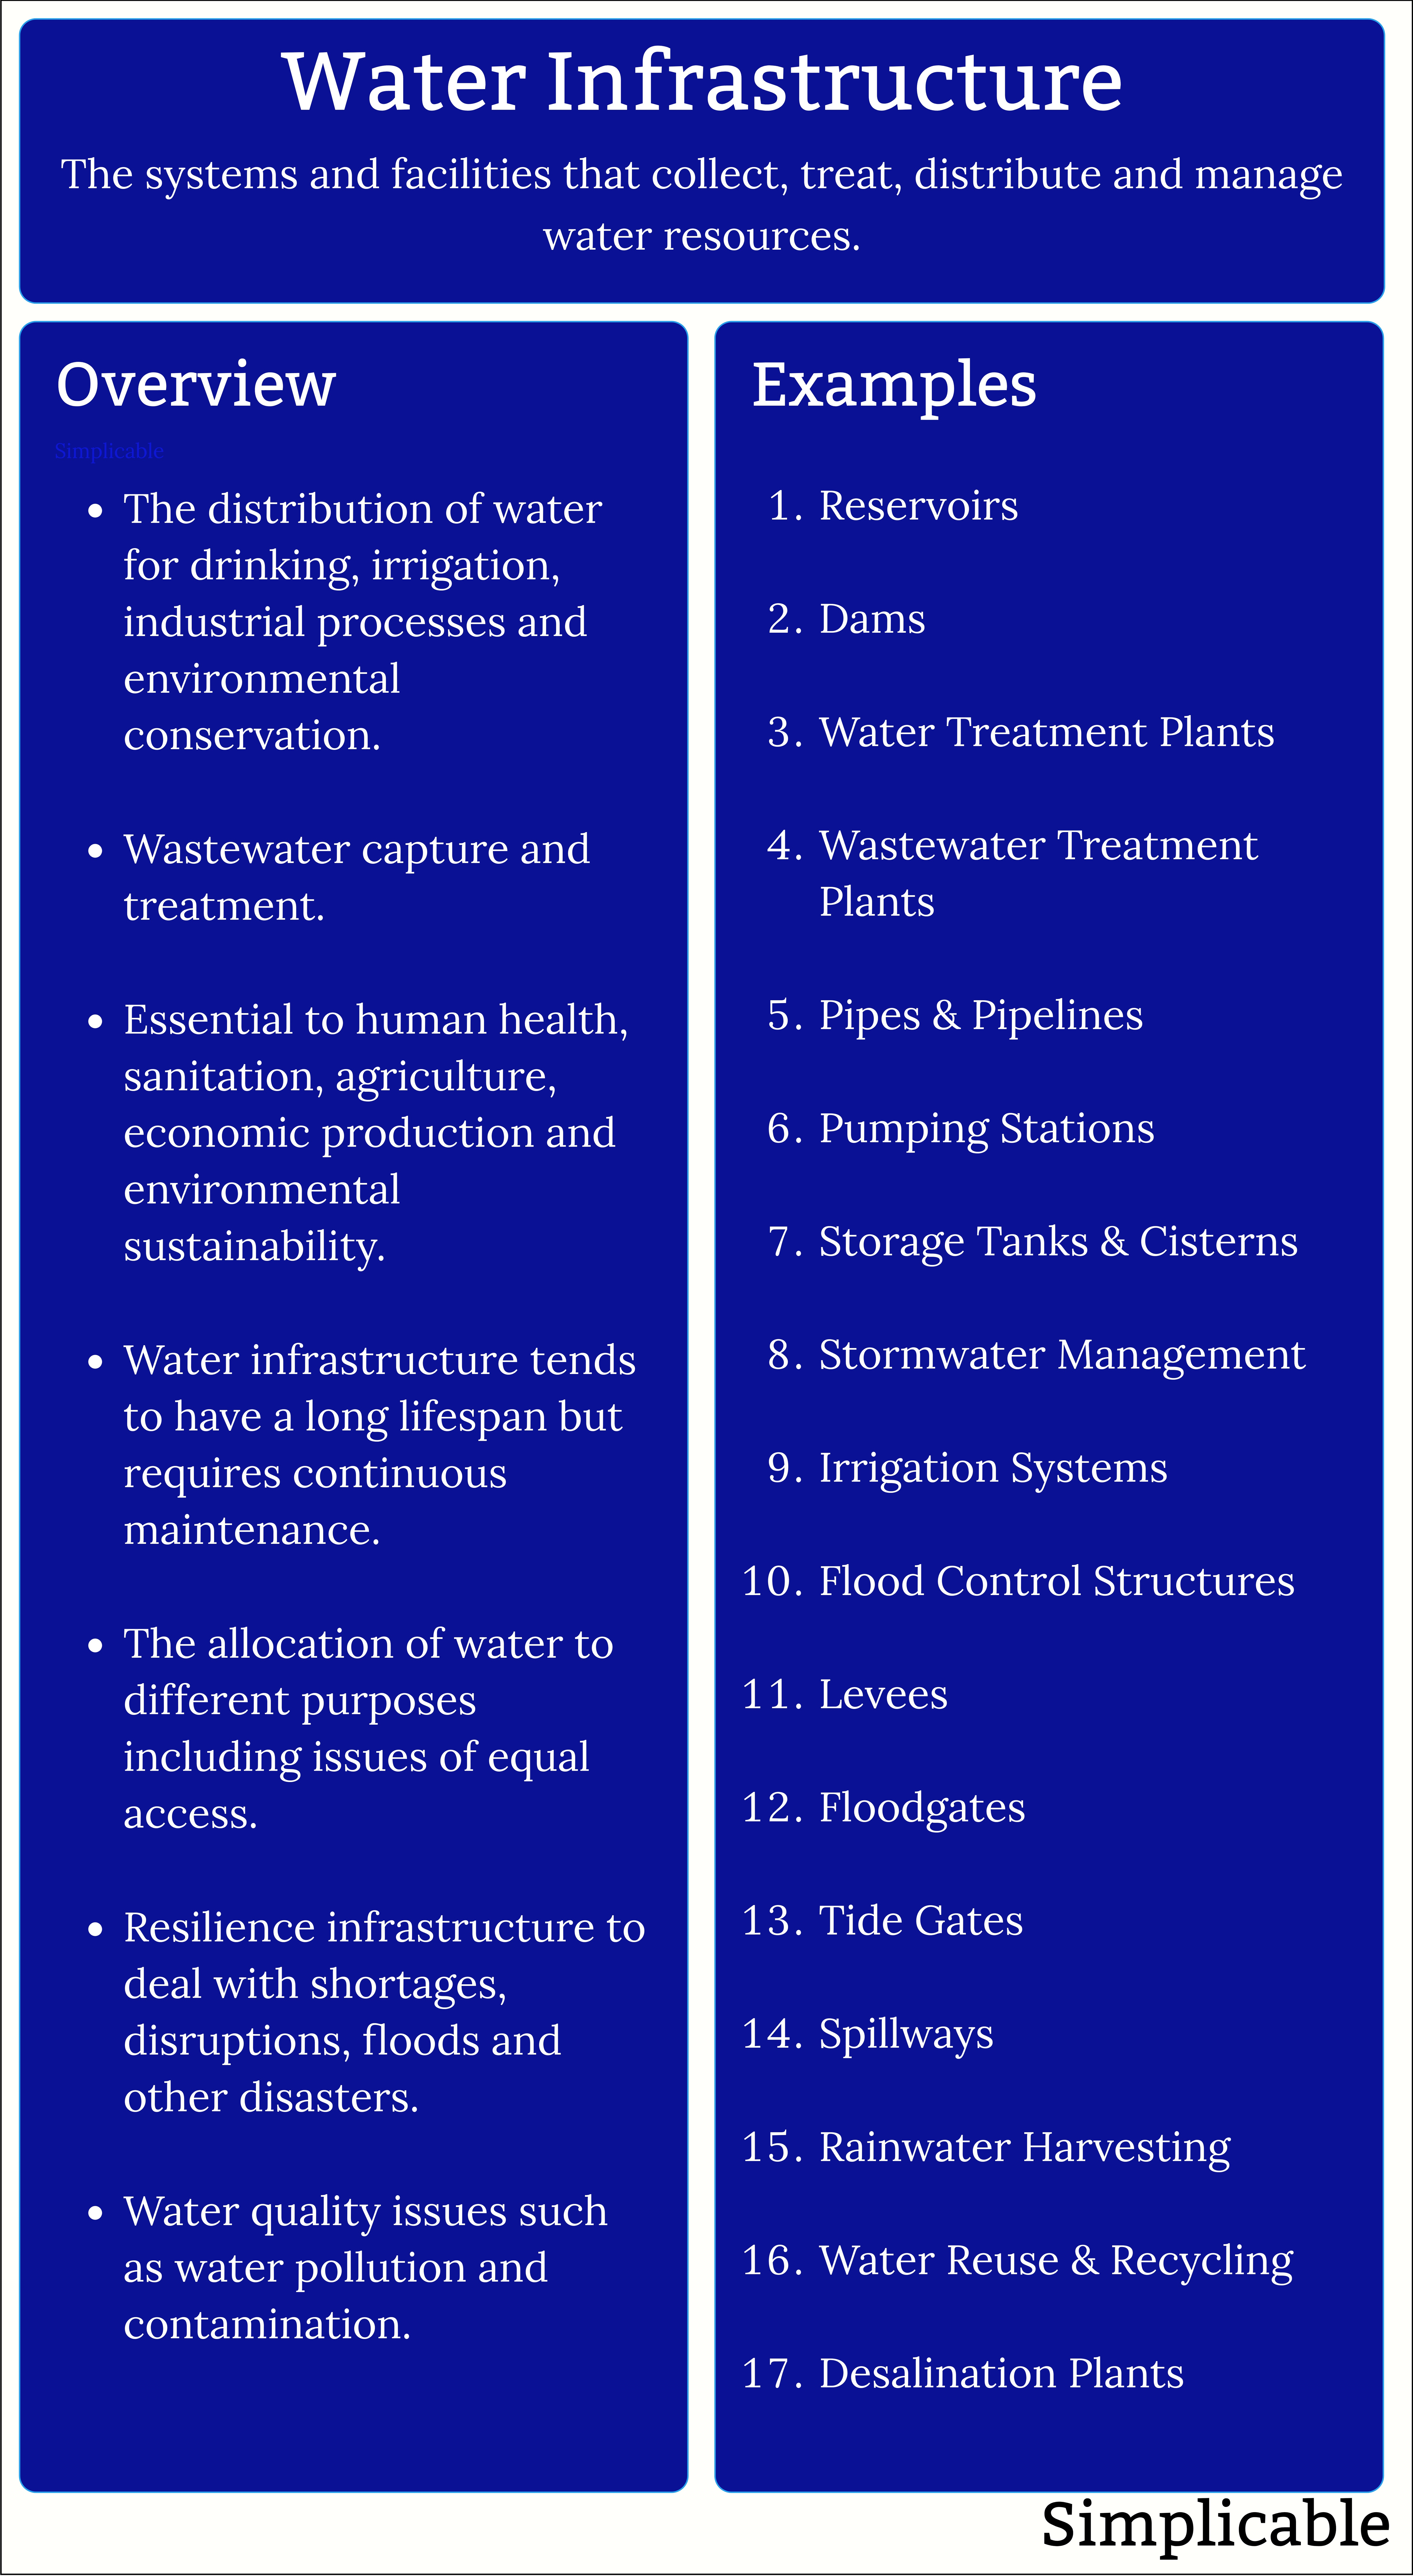 water infrastructure overview and examples